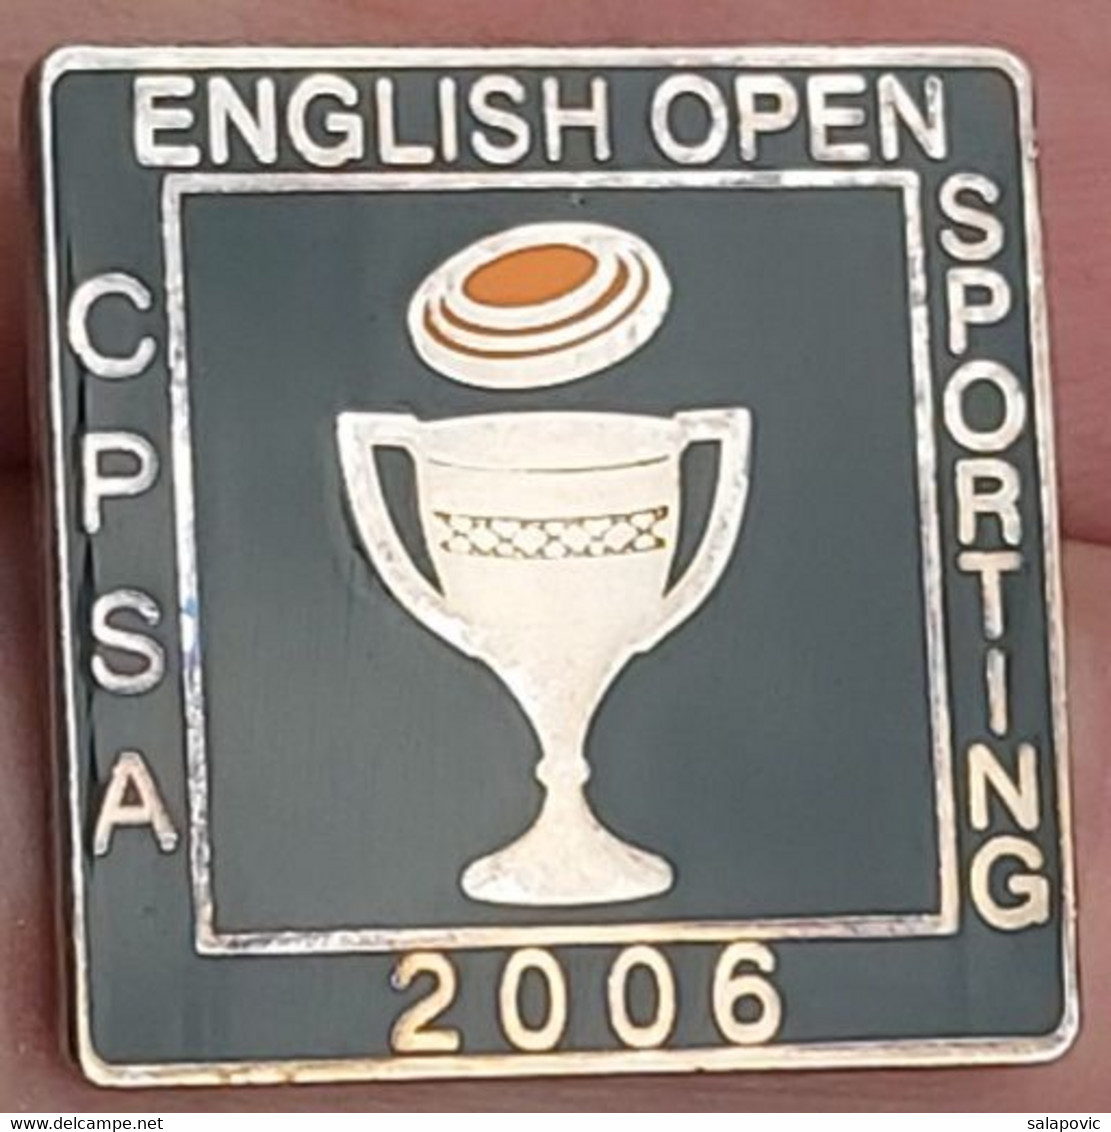 English Open Sporting (CPSA) Clay Pigeon Shooting Association 2006 Archery Shooting PINS BADGES A5/4 - Archery